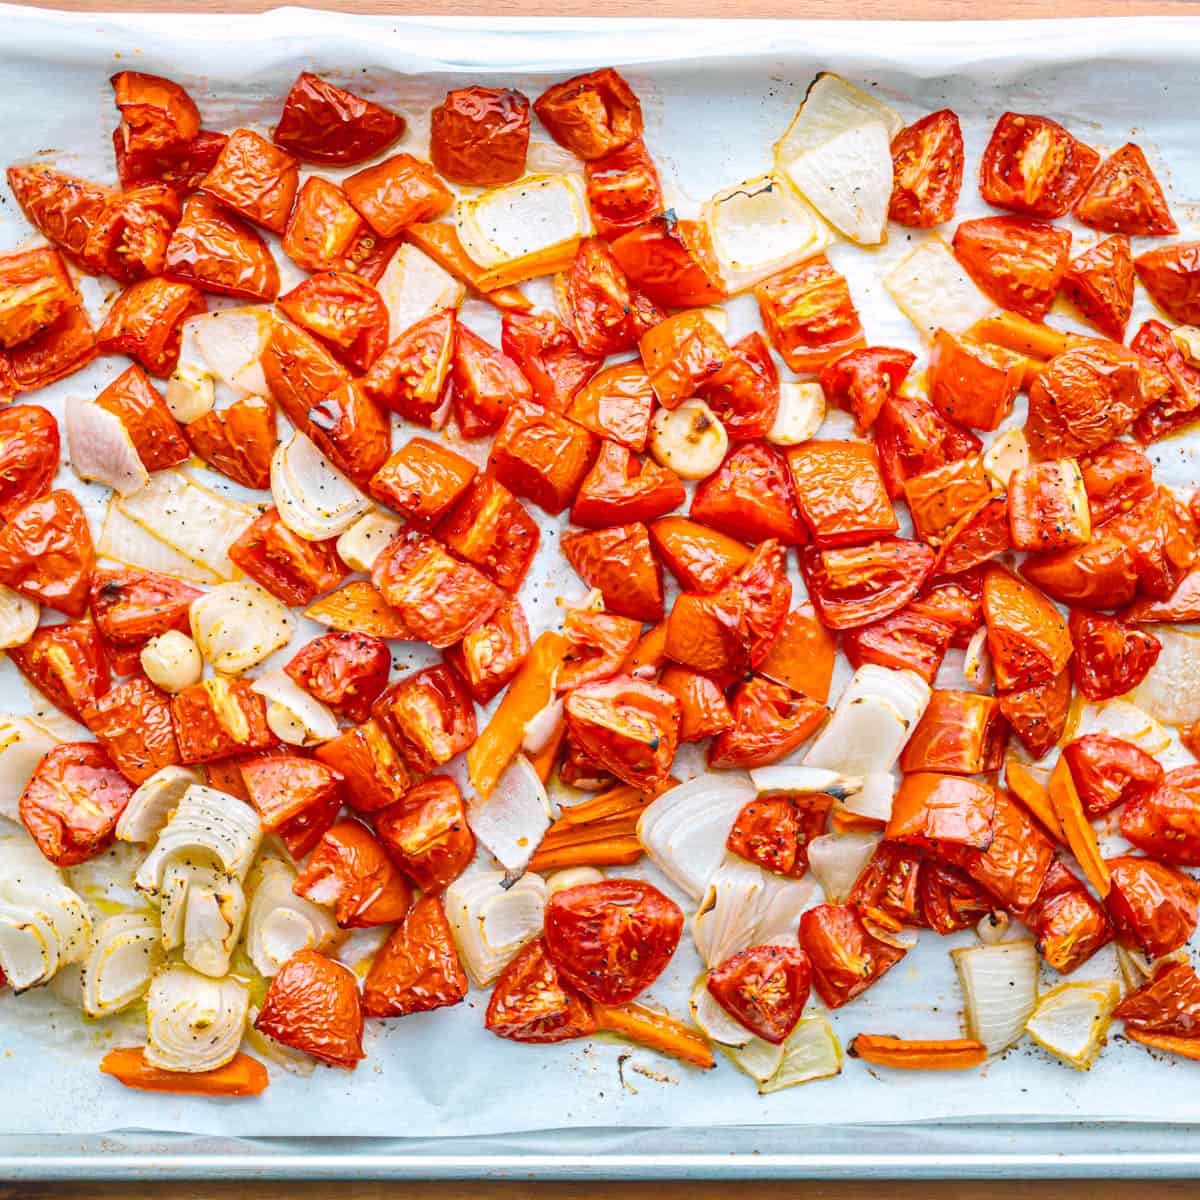 Roast them in the oven for about 30-35 minutes until they're beautifully golden and fragrant.